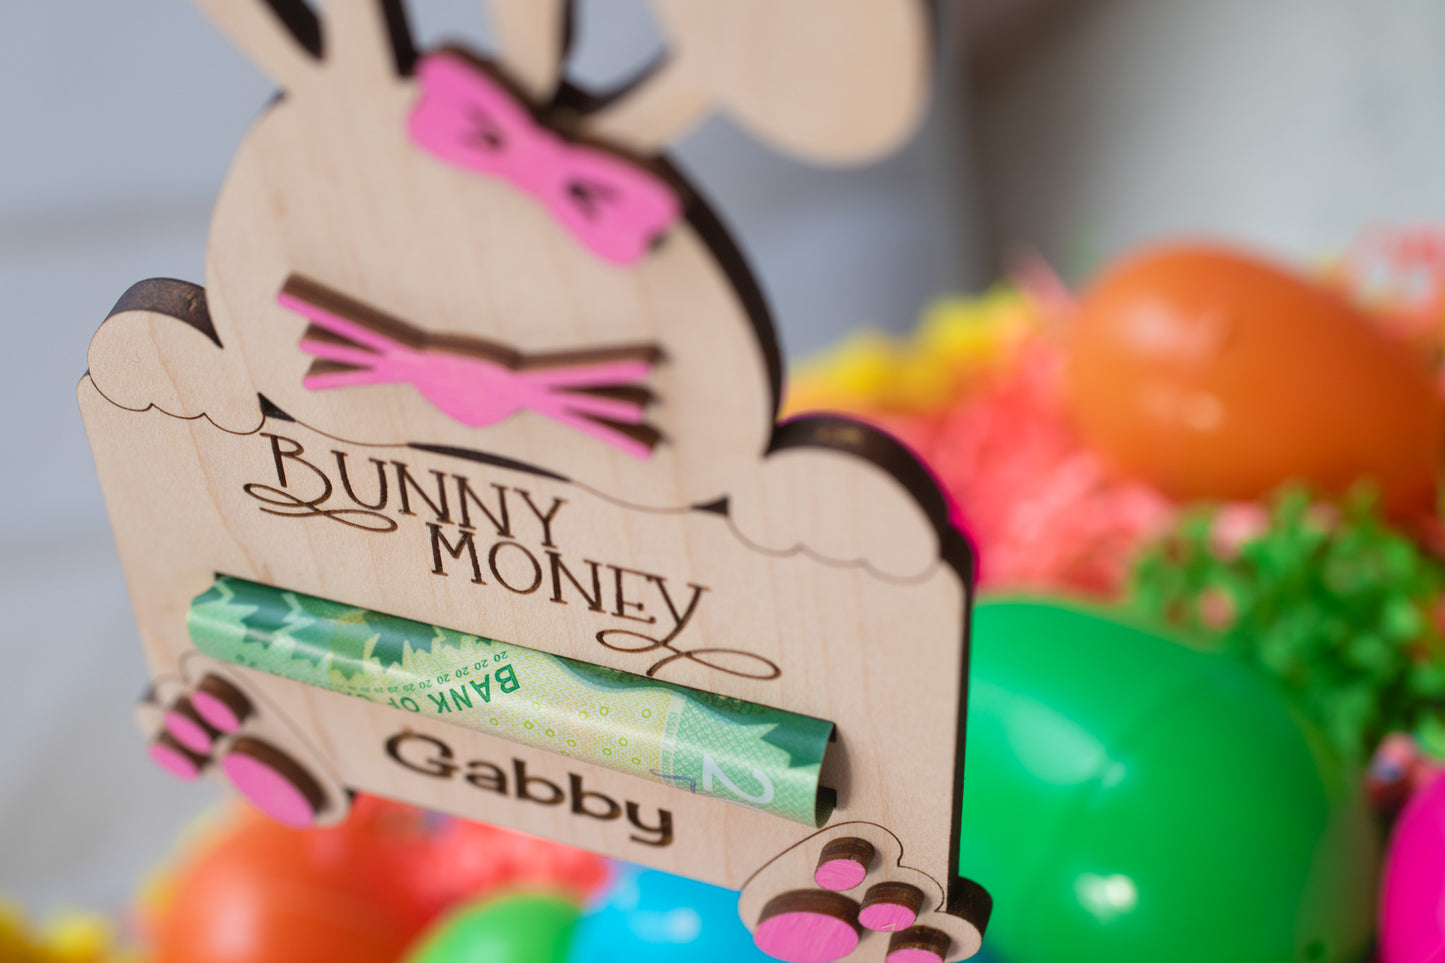 Bunny Money Gift Card and Cash Holders